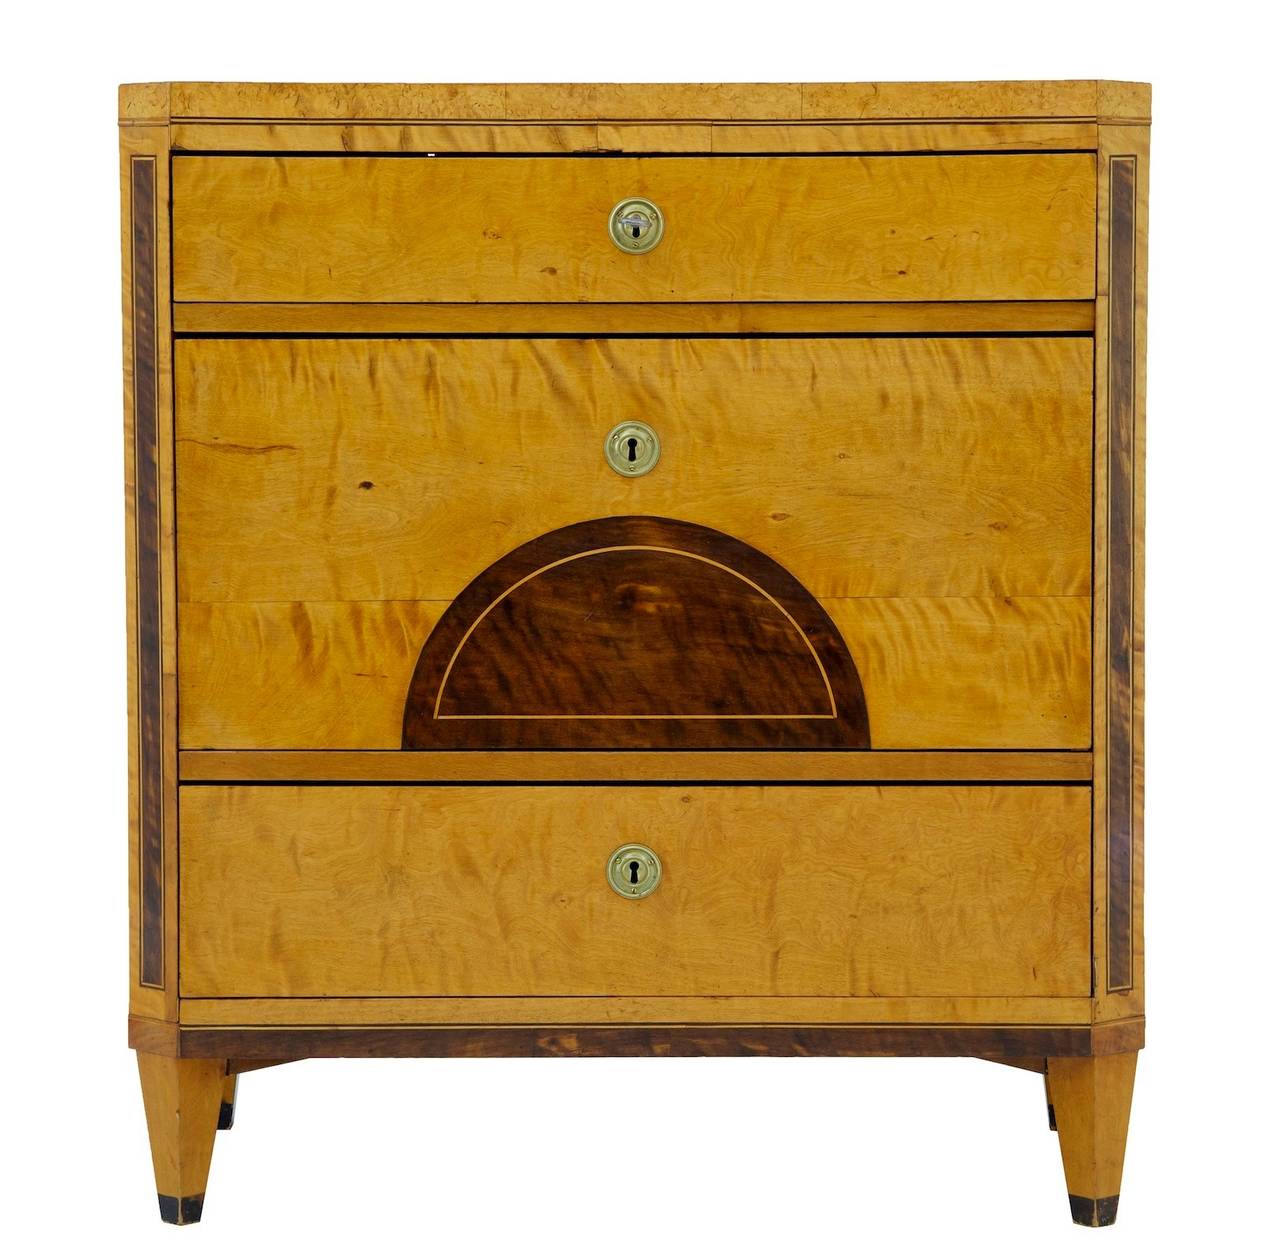 Fine quality chest of drawers, circa 1830. 
Beautiful three-drawer chest, featuring canted corners and karelian birch central half moon and panels. 
Strung to top and front.

Measures: Height: 33 1/4